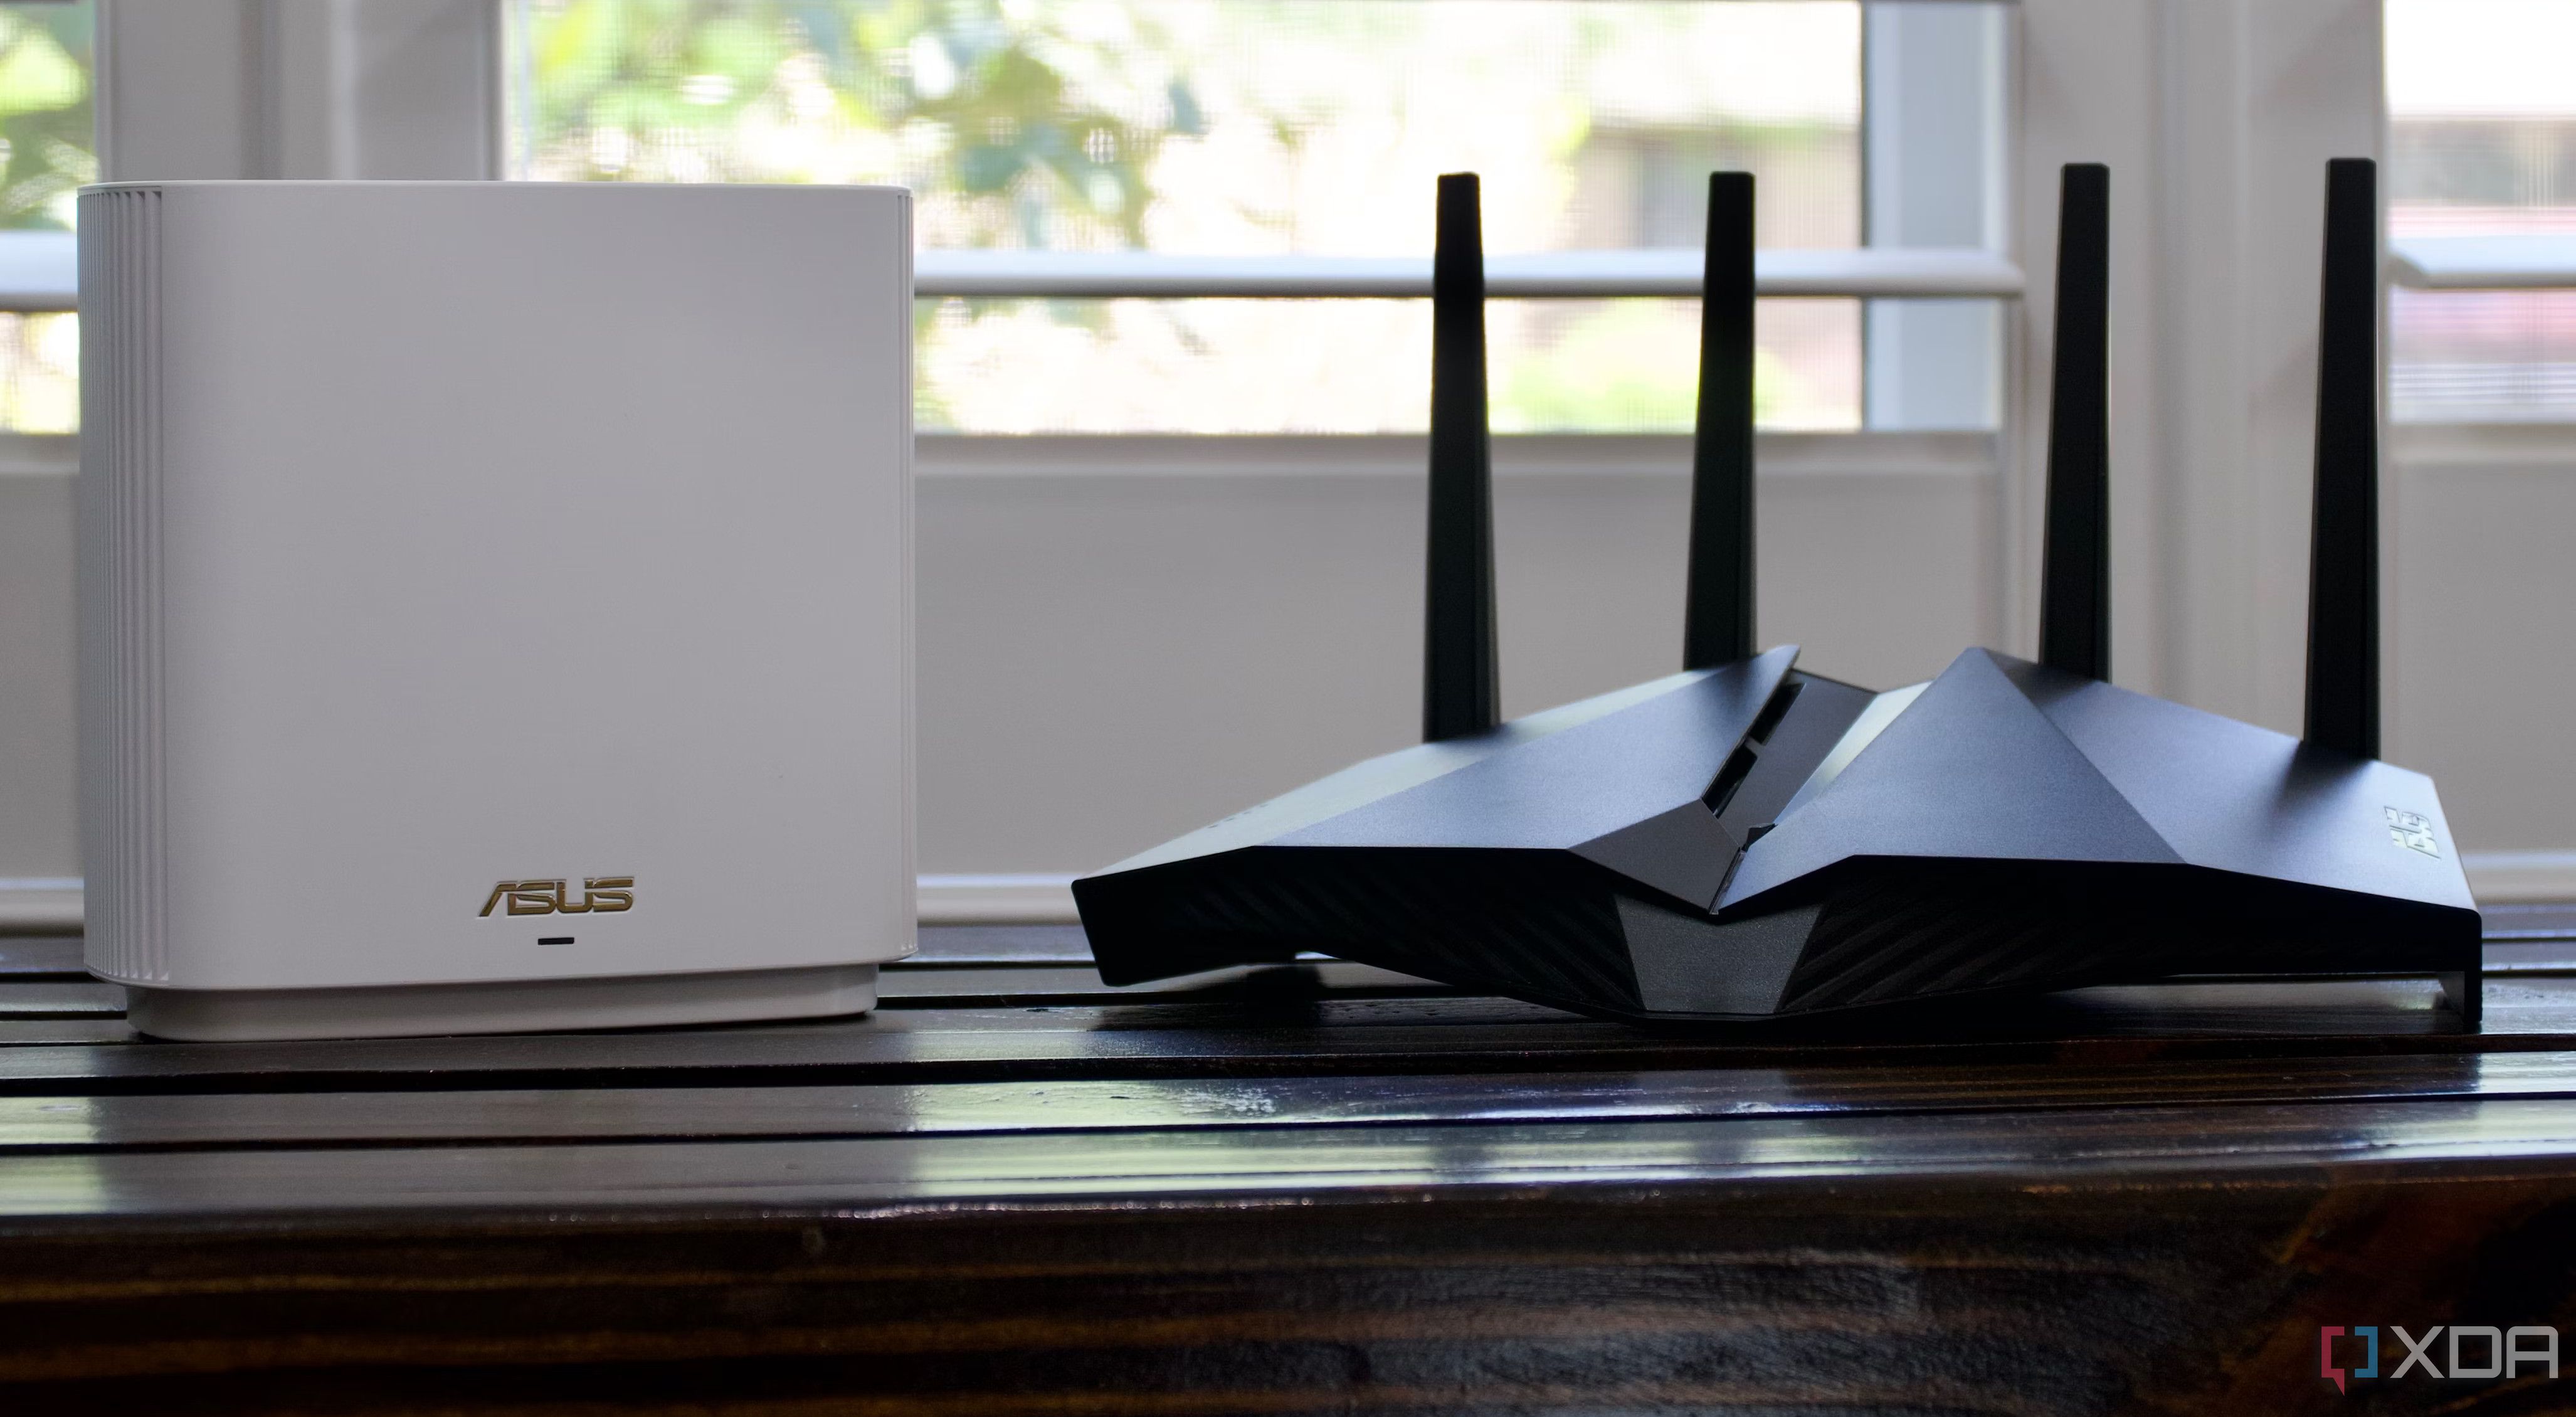 Here's why you should install a VPN on your router